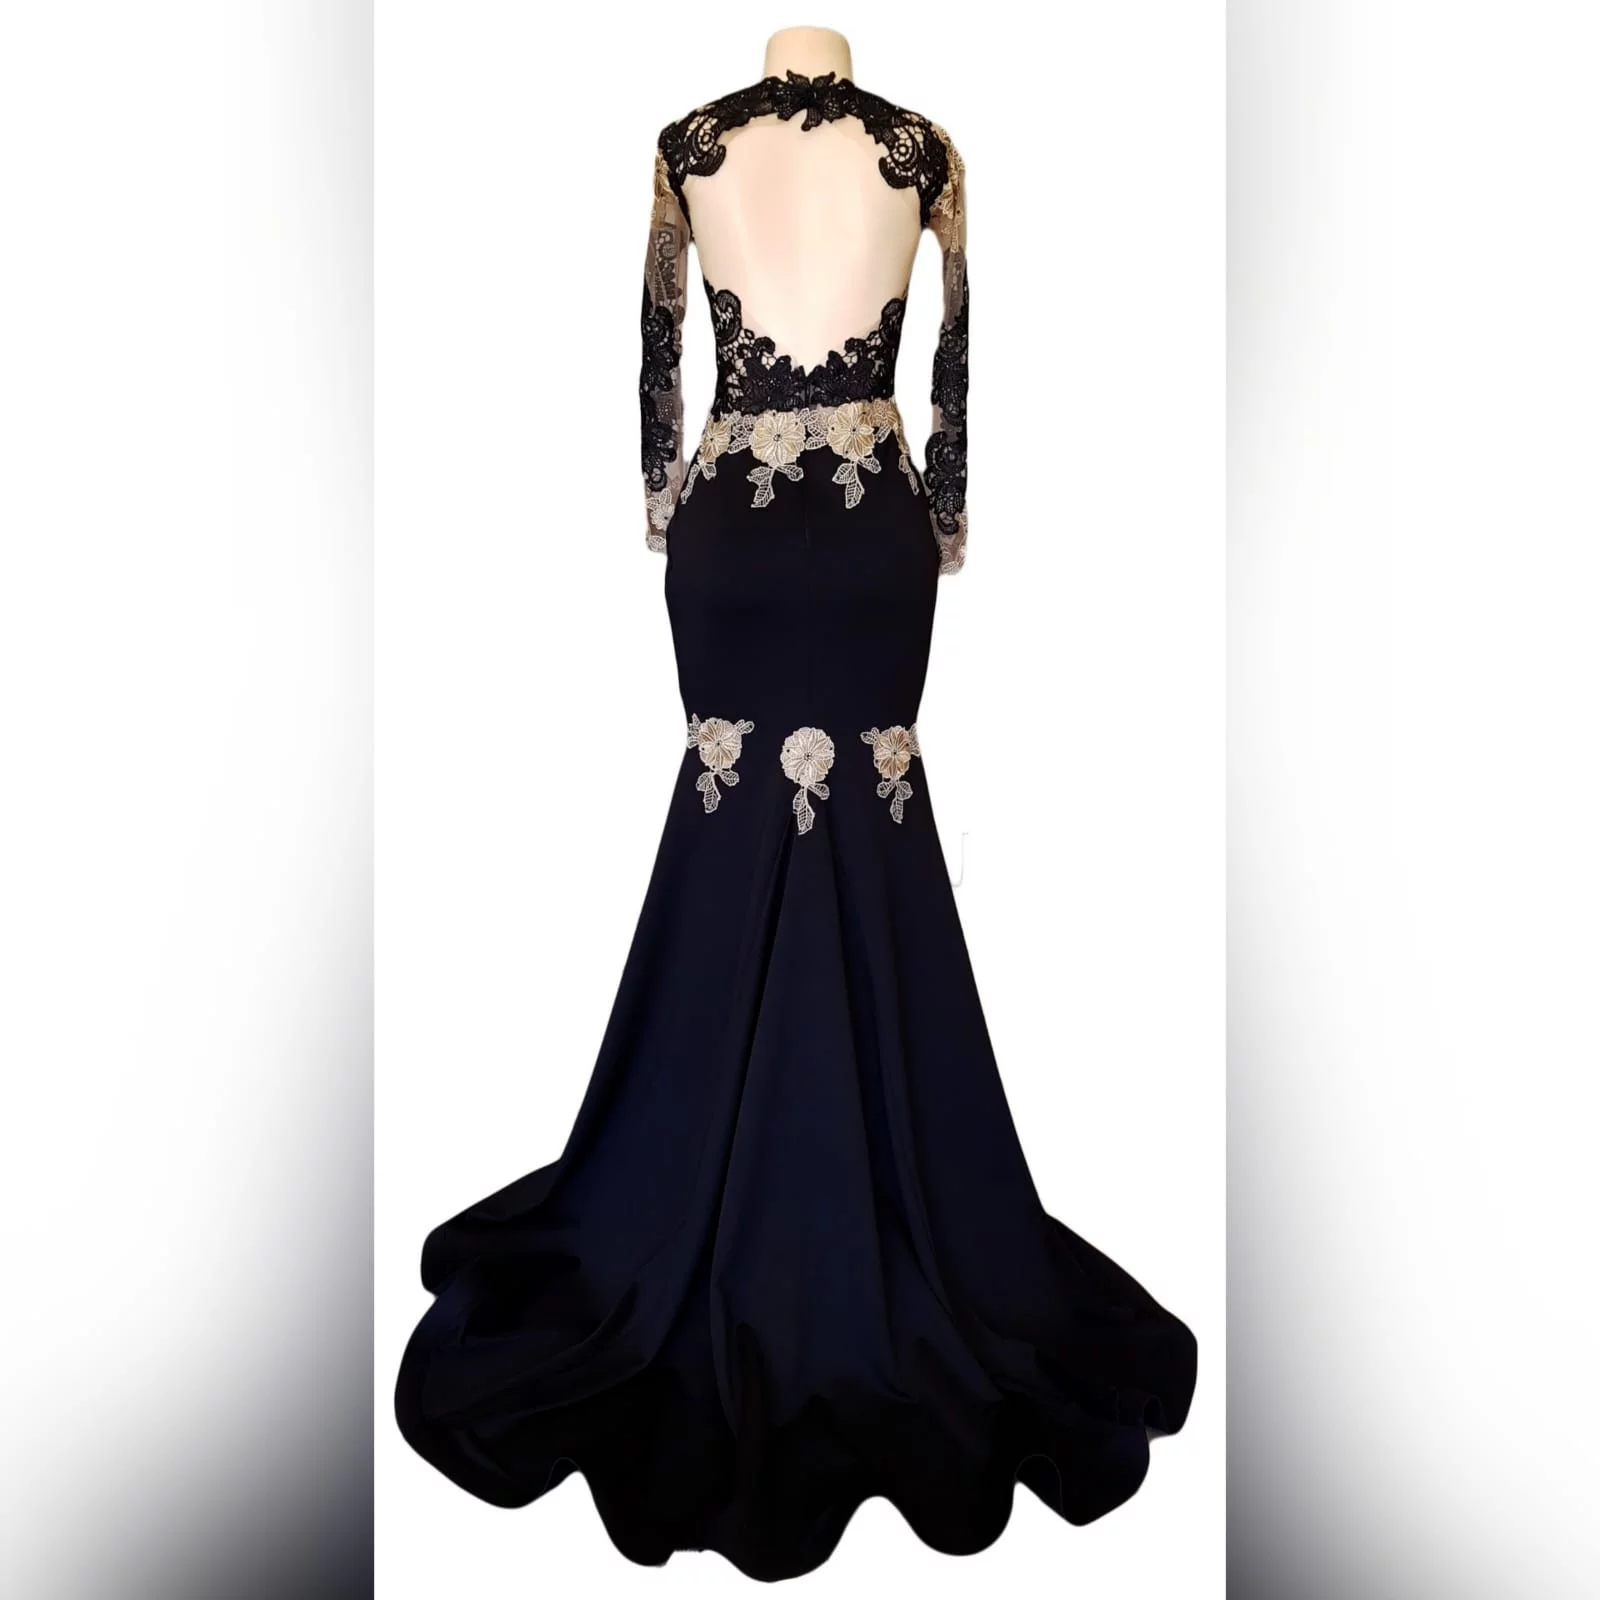 Black & gold soft mermaid prom dress 7 black & gold soft mermaid prom dress with an illusion lace bodice and long sleeves. With an open back and a train. Lace detailed with beads.